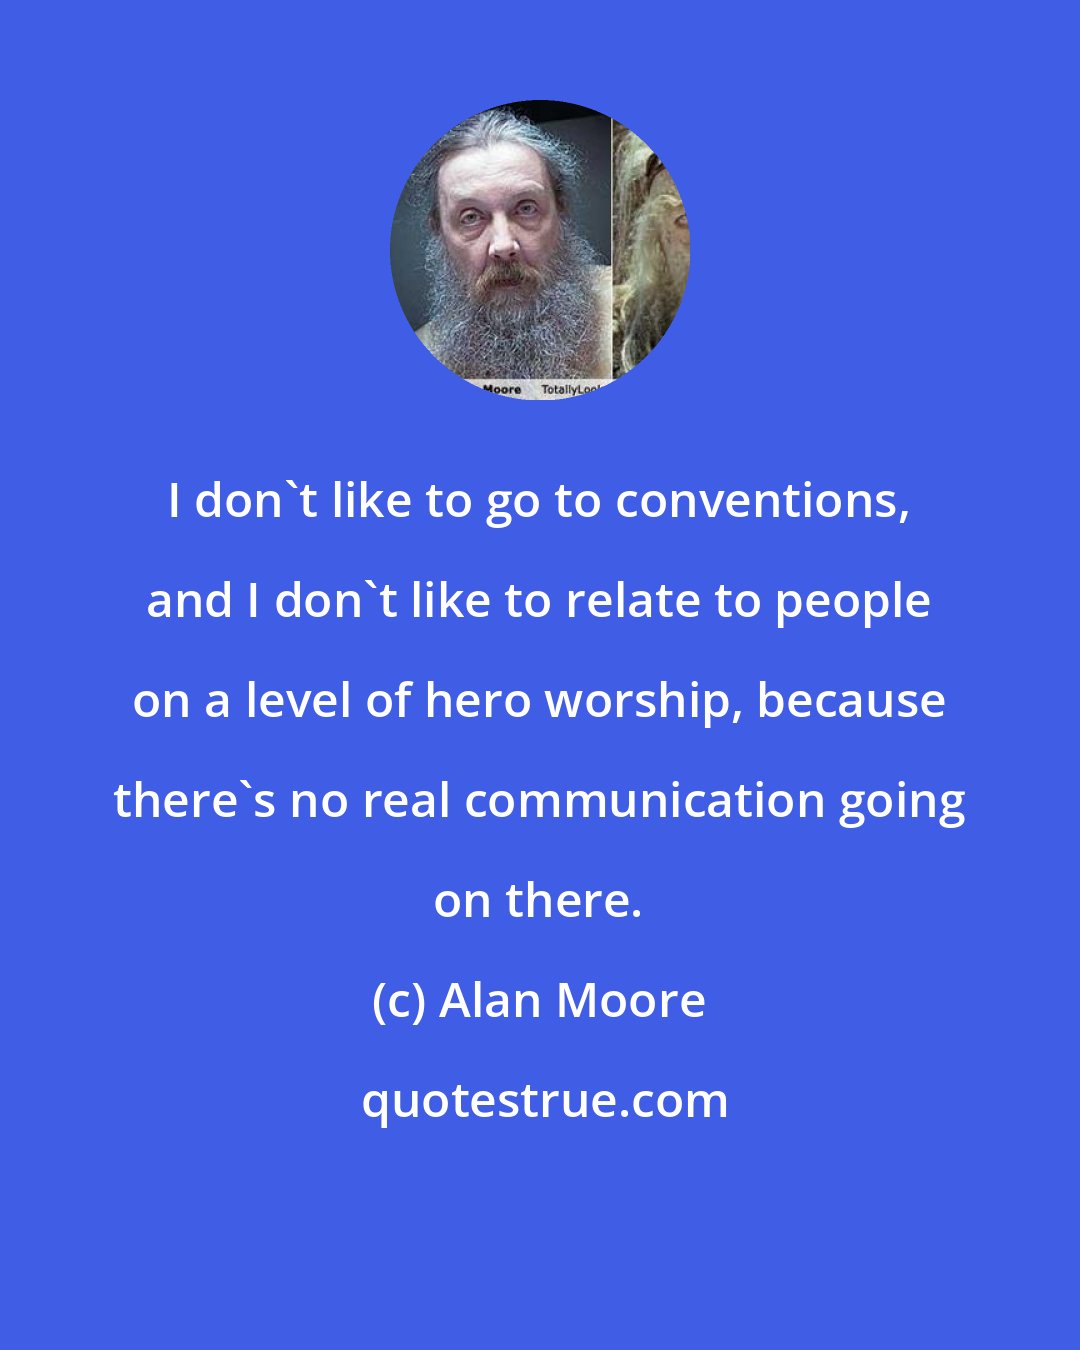 Alan Moore: I don't like to go to conventions, and I don't like to relate to people on a level of hero worship, because there's no real communication going on there.